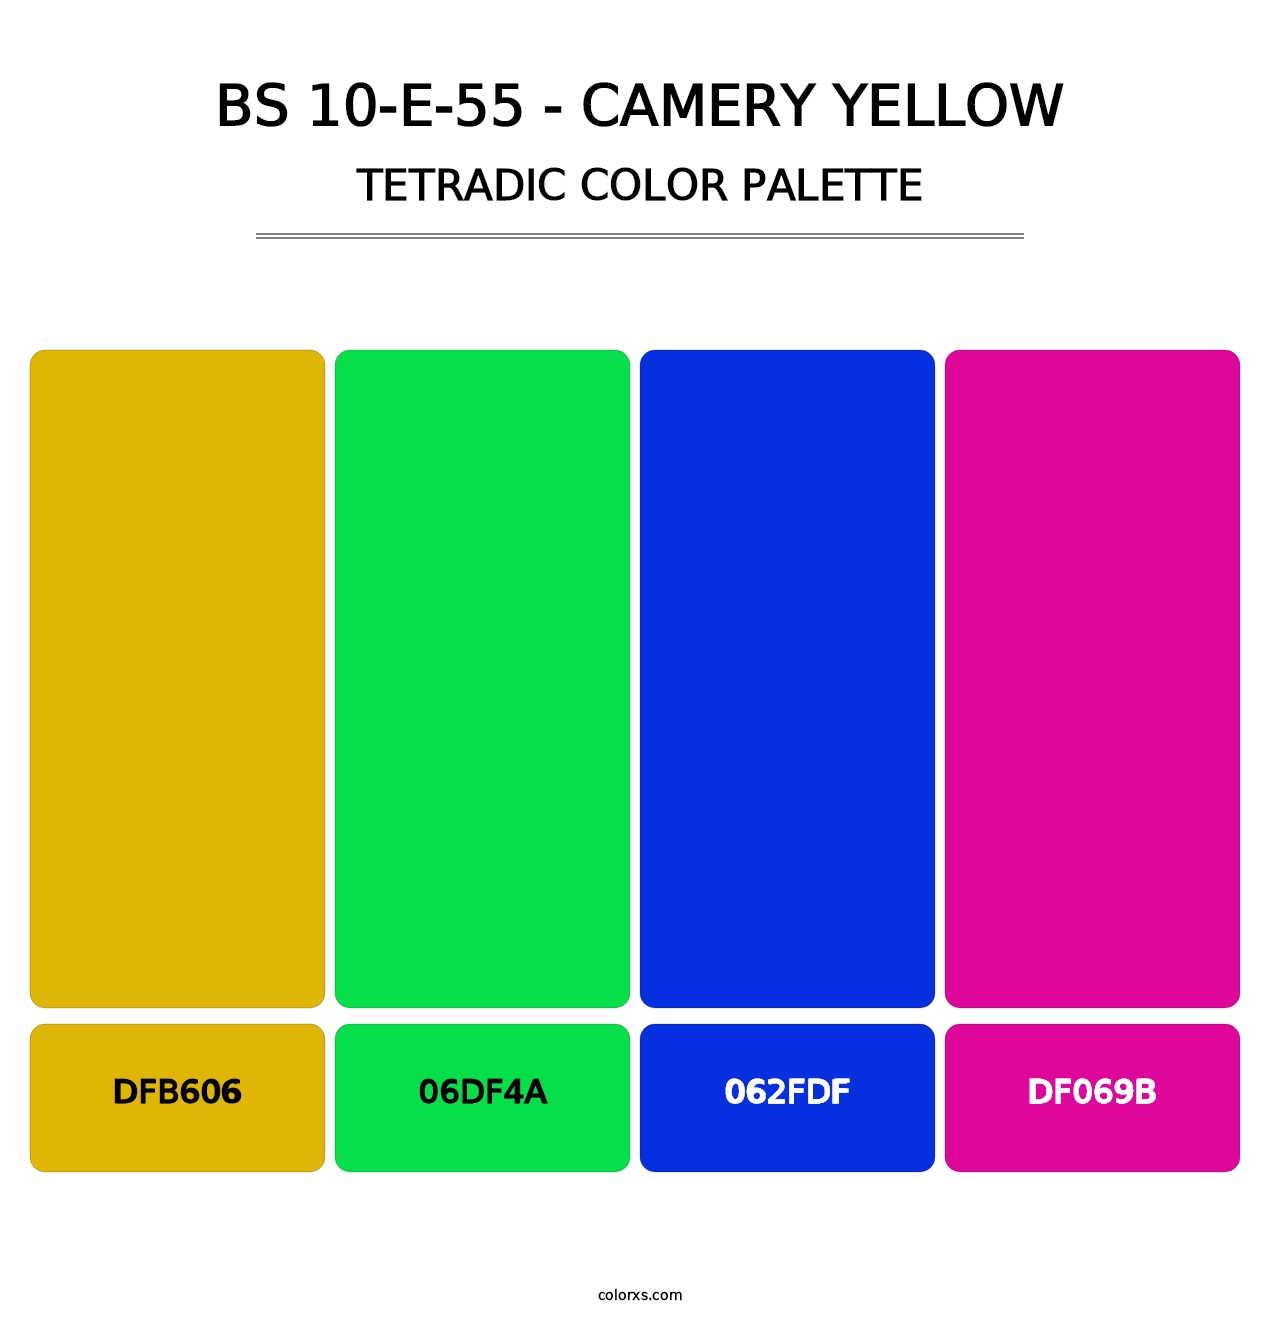 BS 10-E-55 - Camery Yellow - Tetradic Color Palette